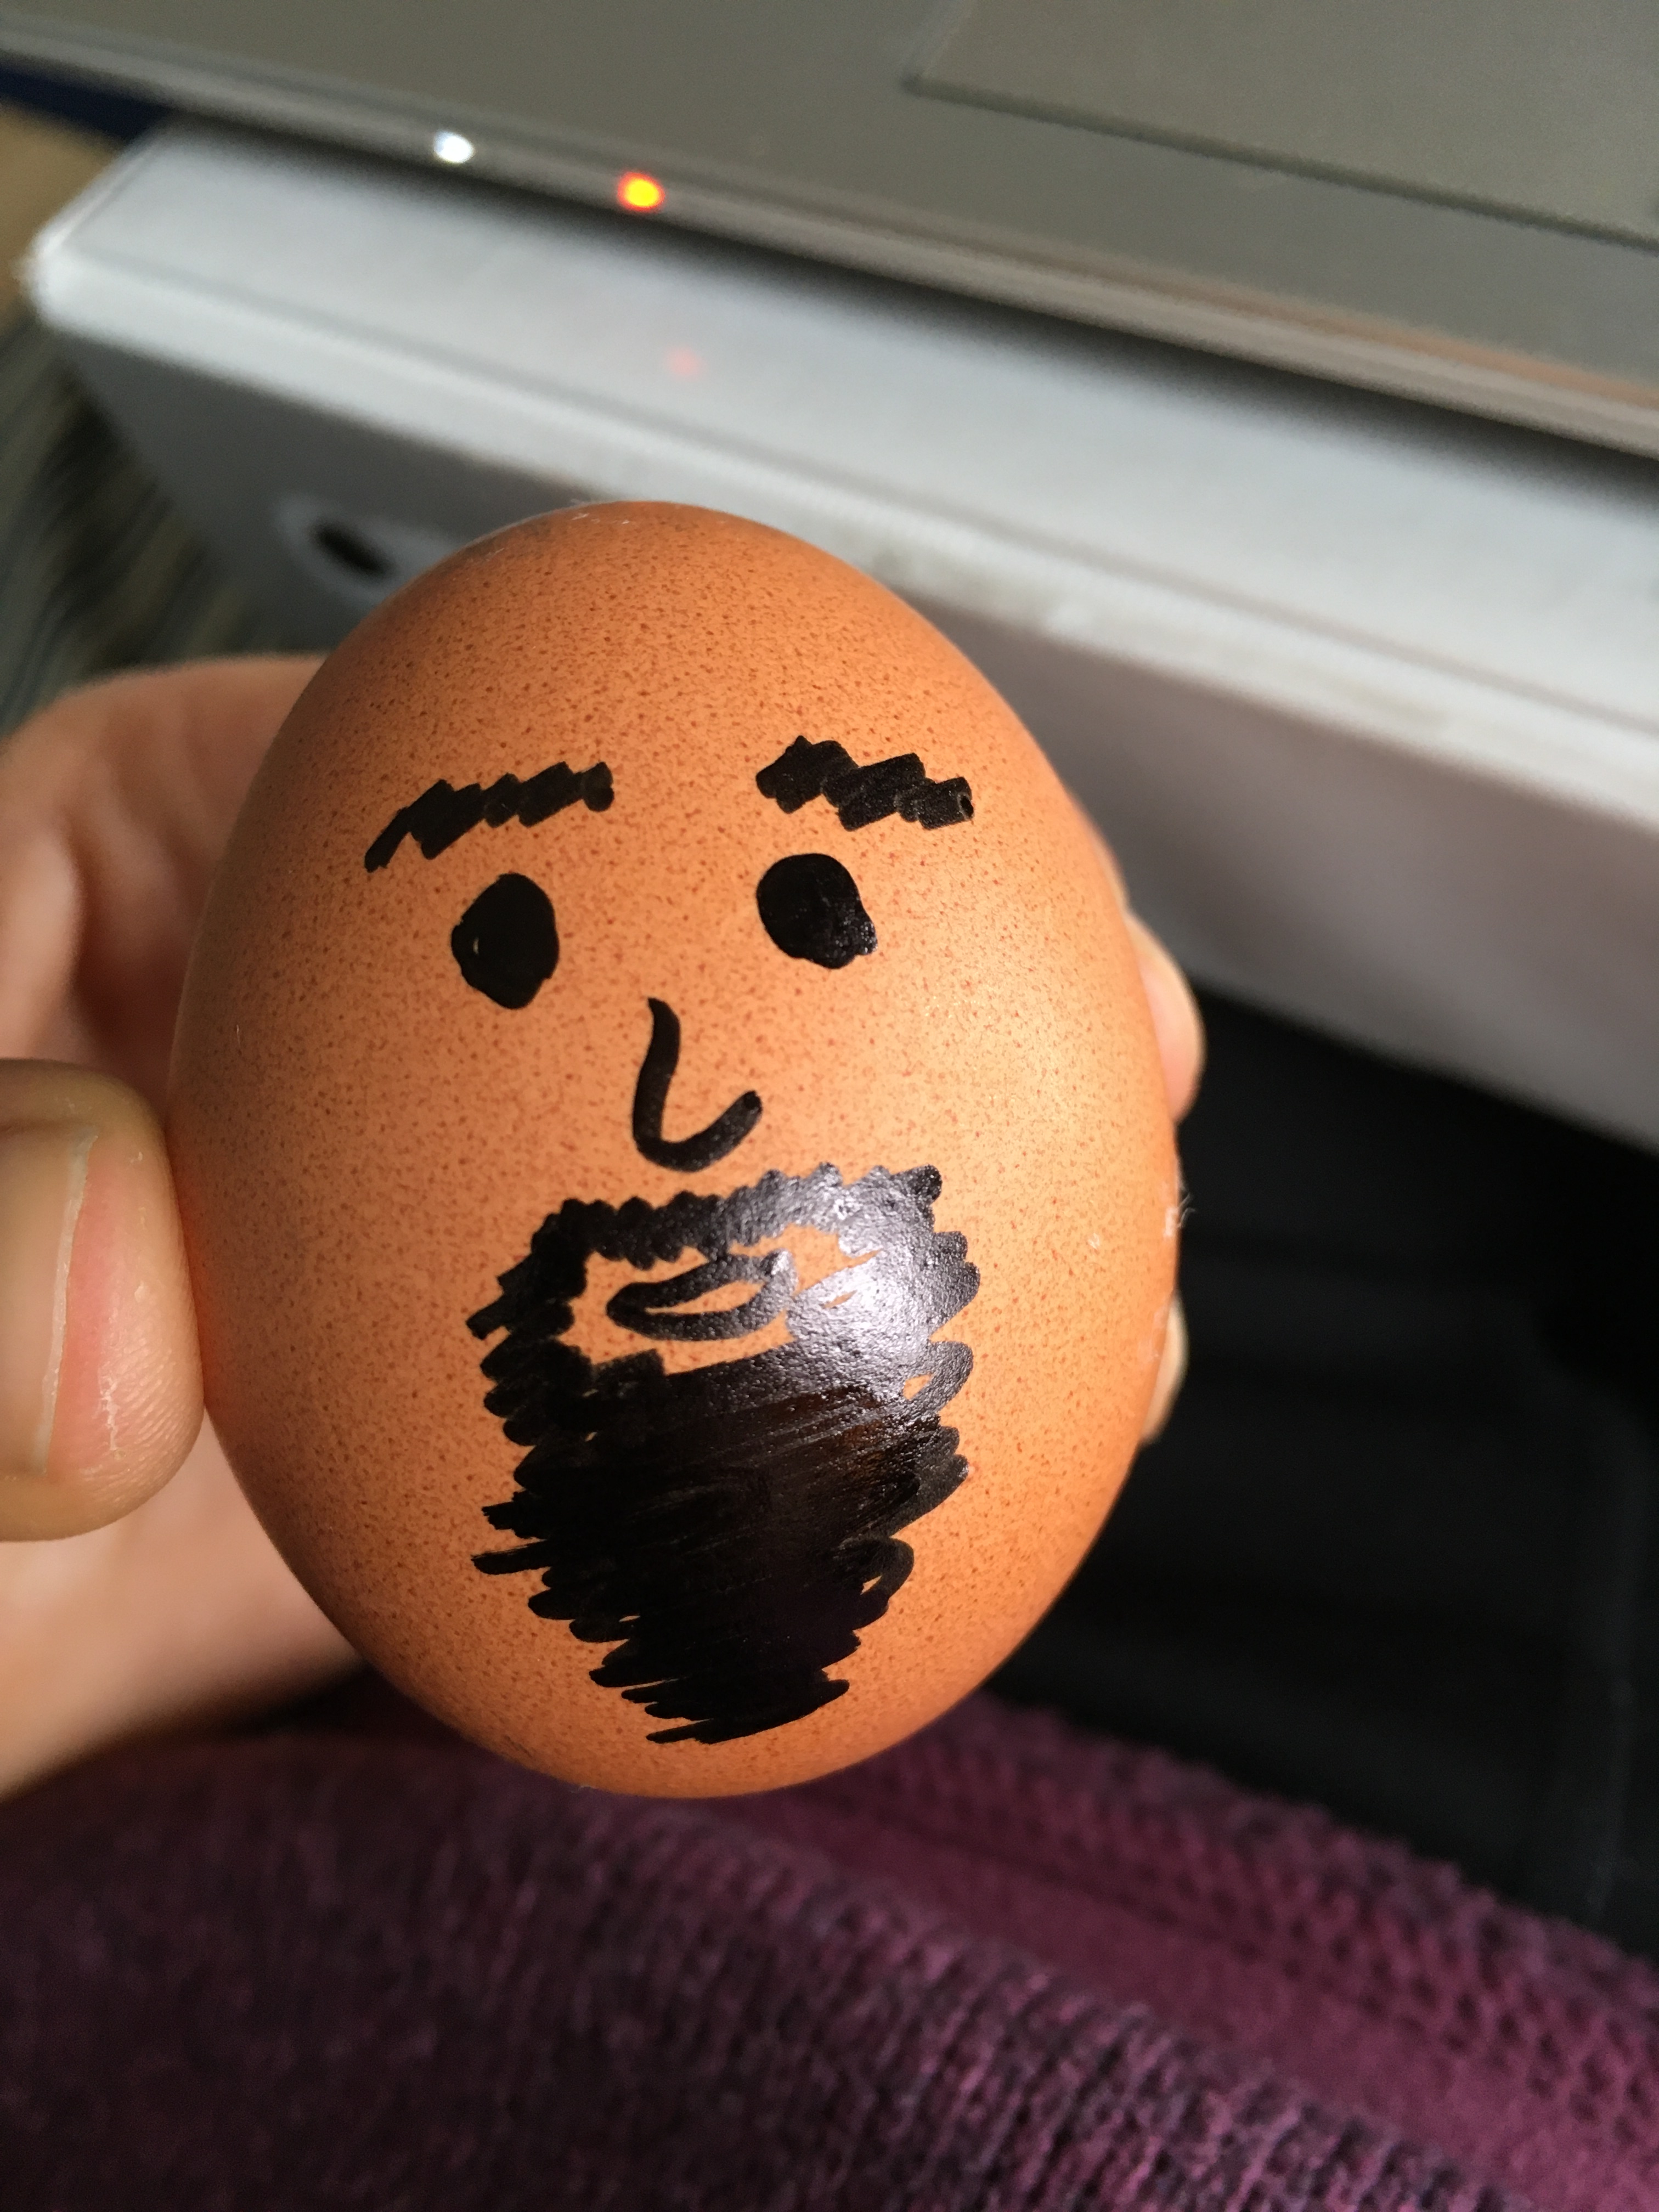 An egg with a bearded face drawn on it.